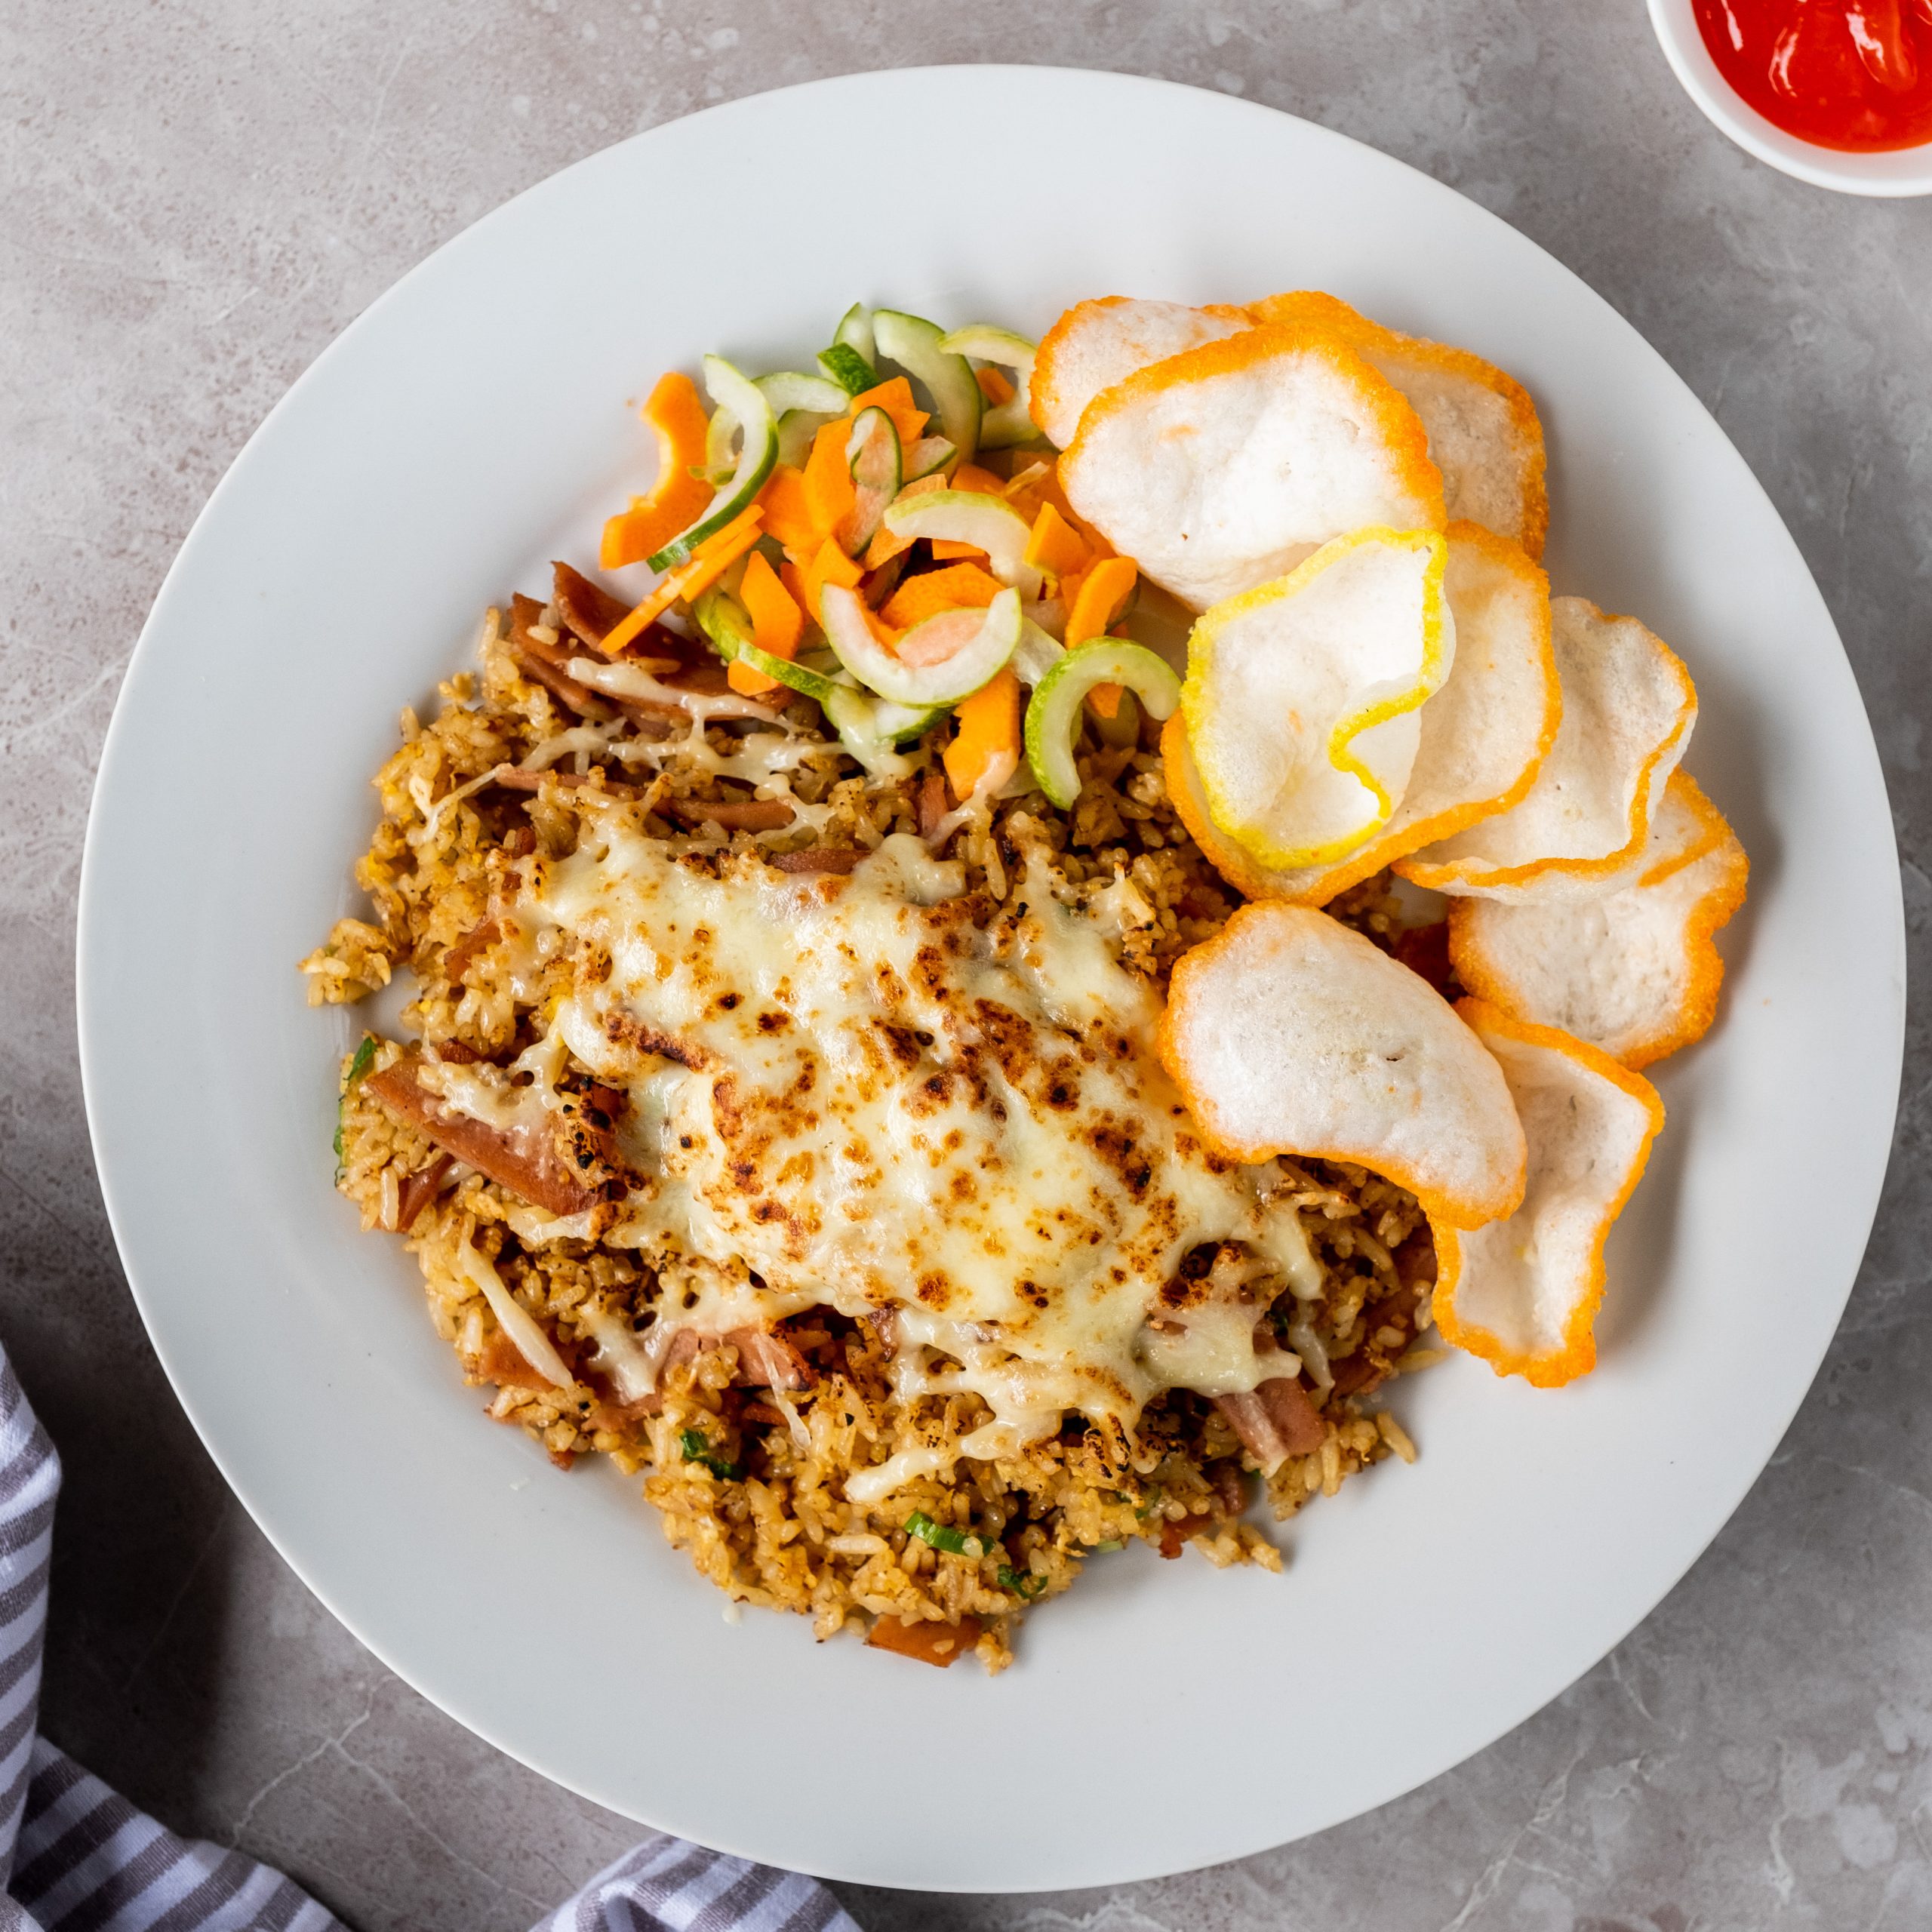  NASGOR SMOKED BEEF WITH CHEESE  